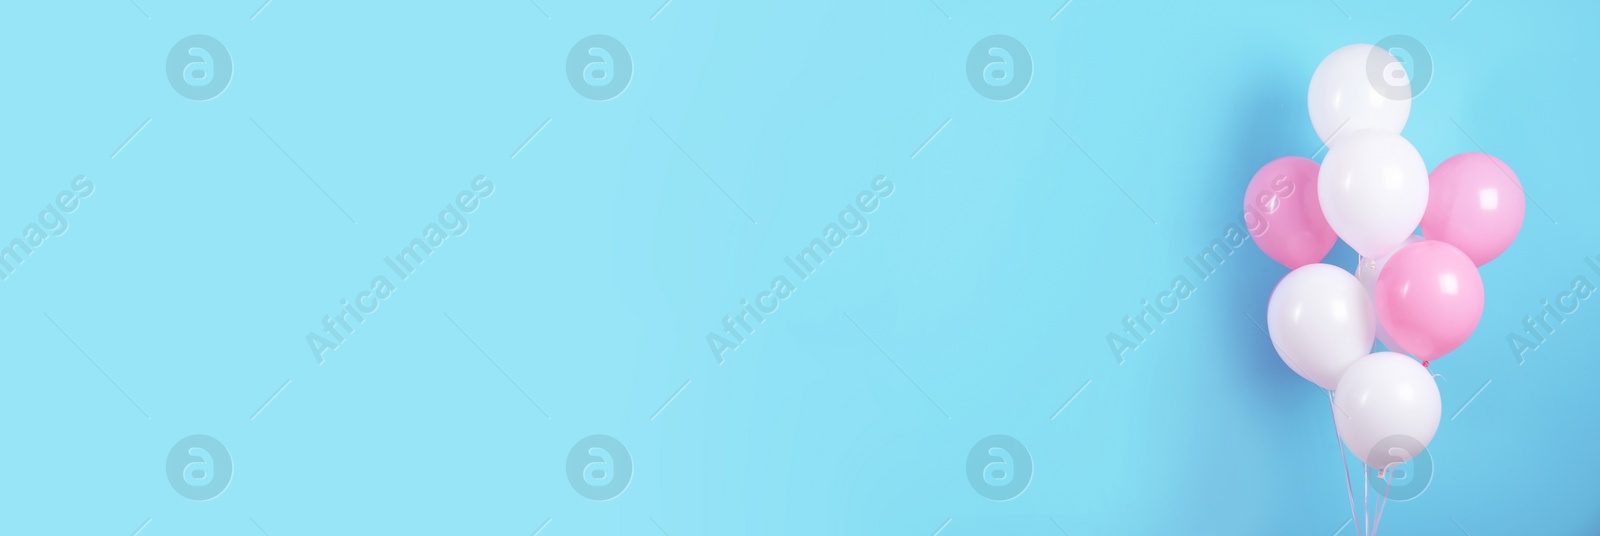 Image of Bunch of pink and white balloons on light blue background, space for text. Banner design 